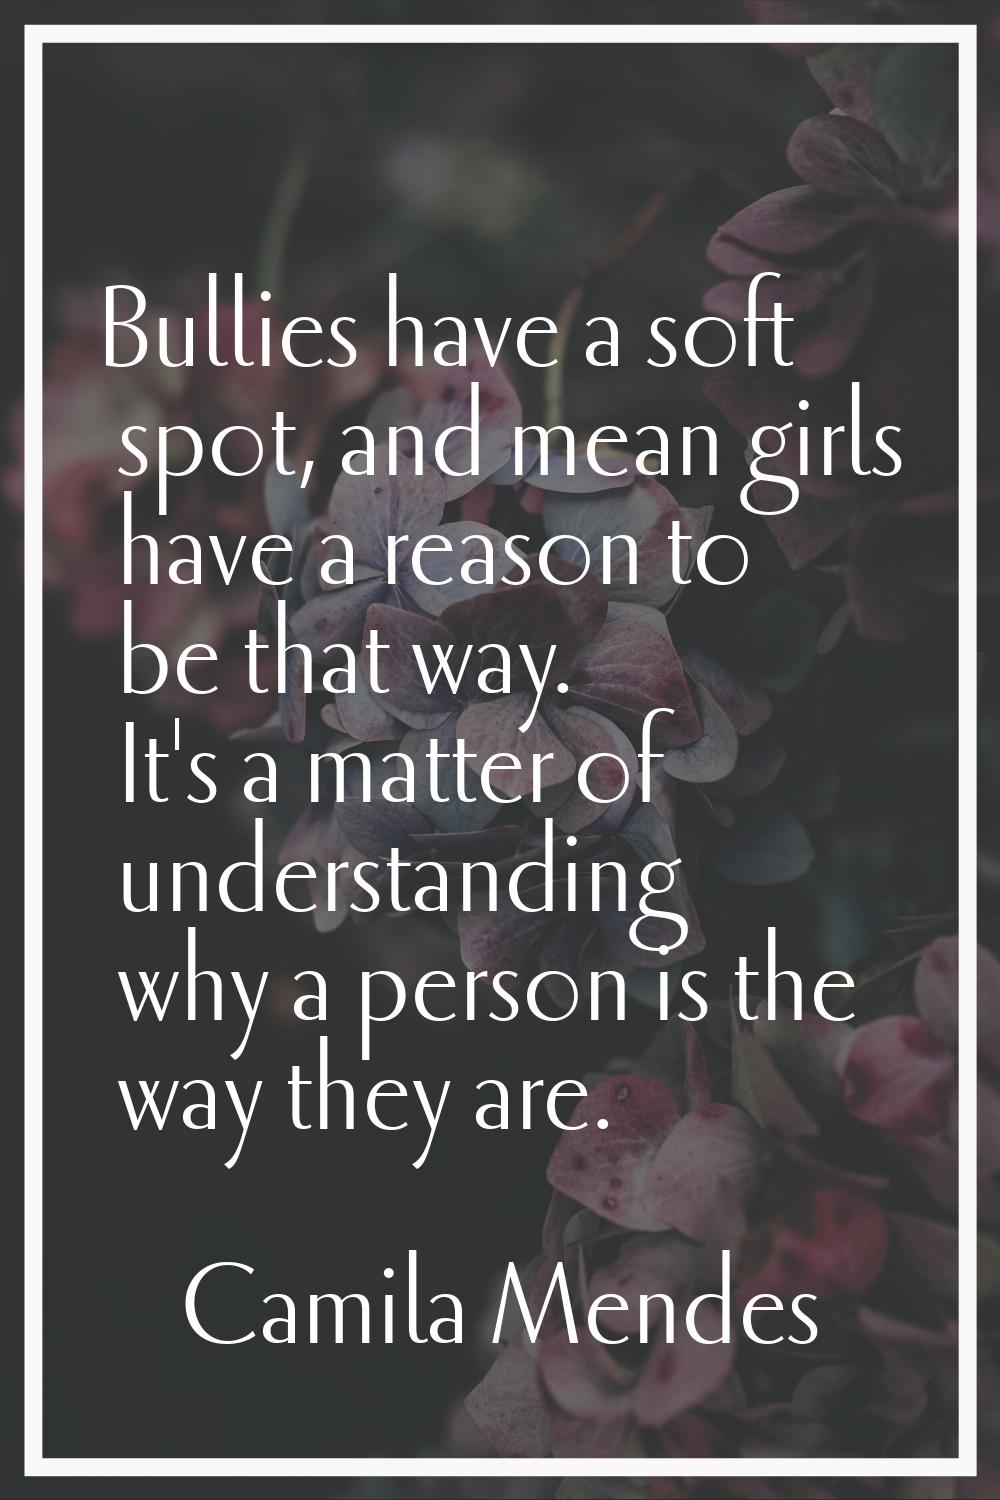 Bullies have a soft spot, and mean girls have a reason to be that way. It's a matter of understandi